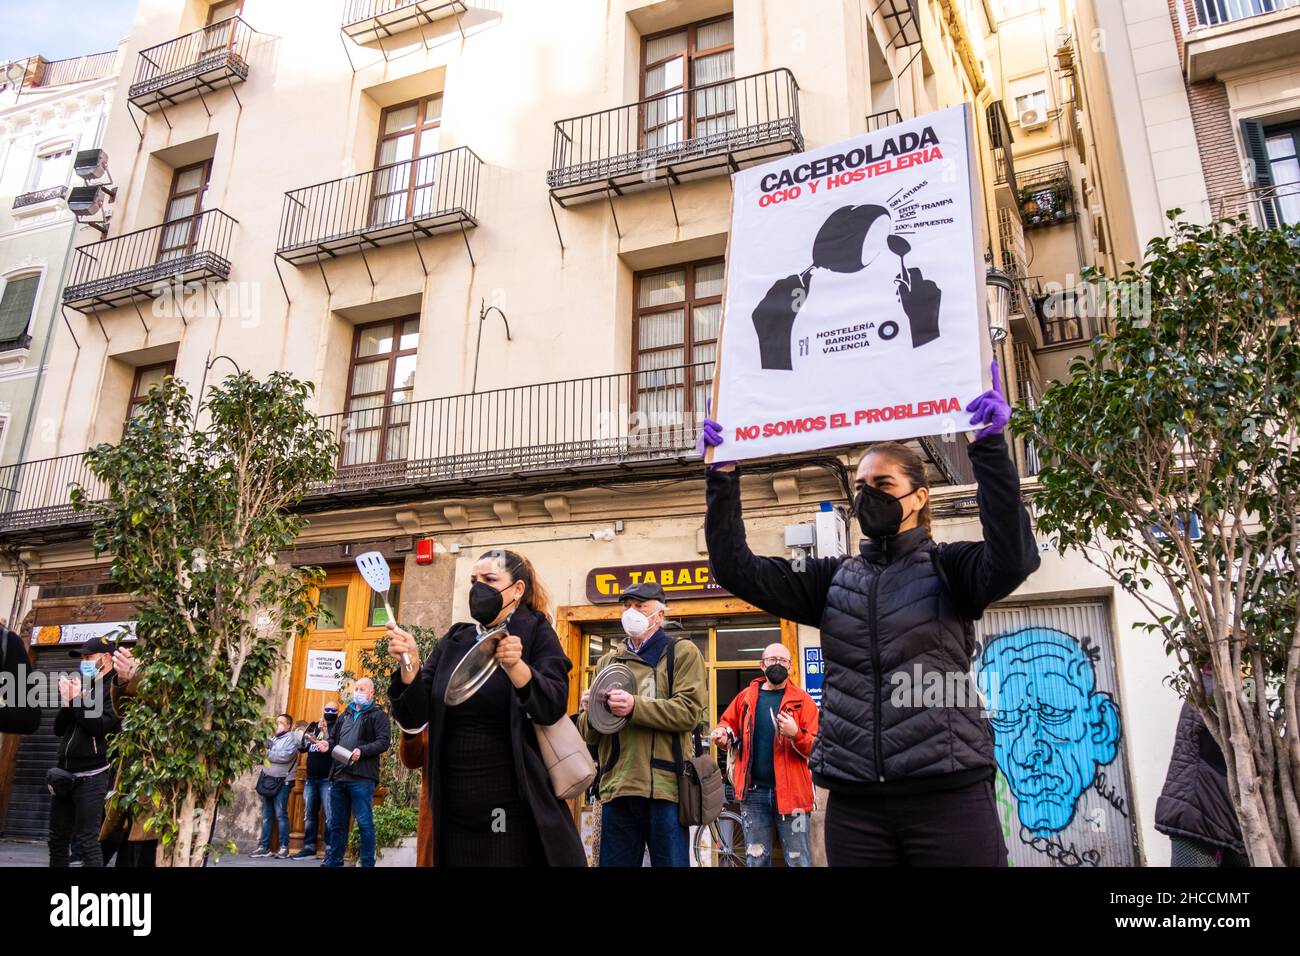 Valencia, Spain; January 21, 2021: Demonstrators against the measures against Covid taken against the hospitality sector by the local government. Stock Photo